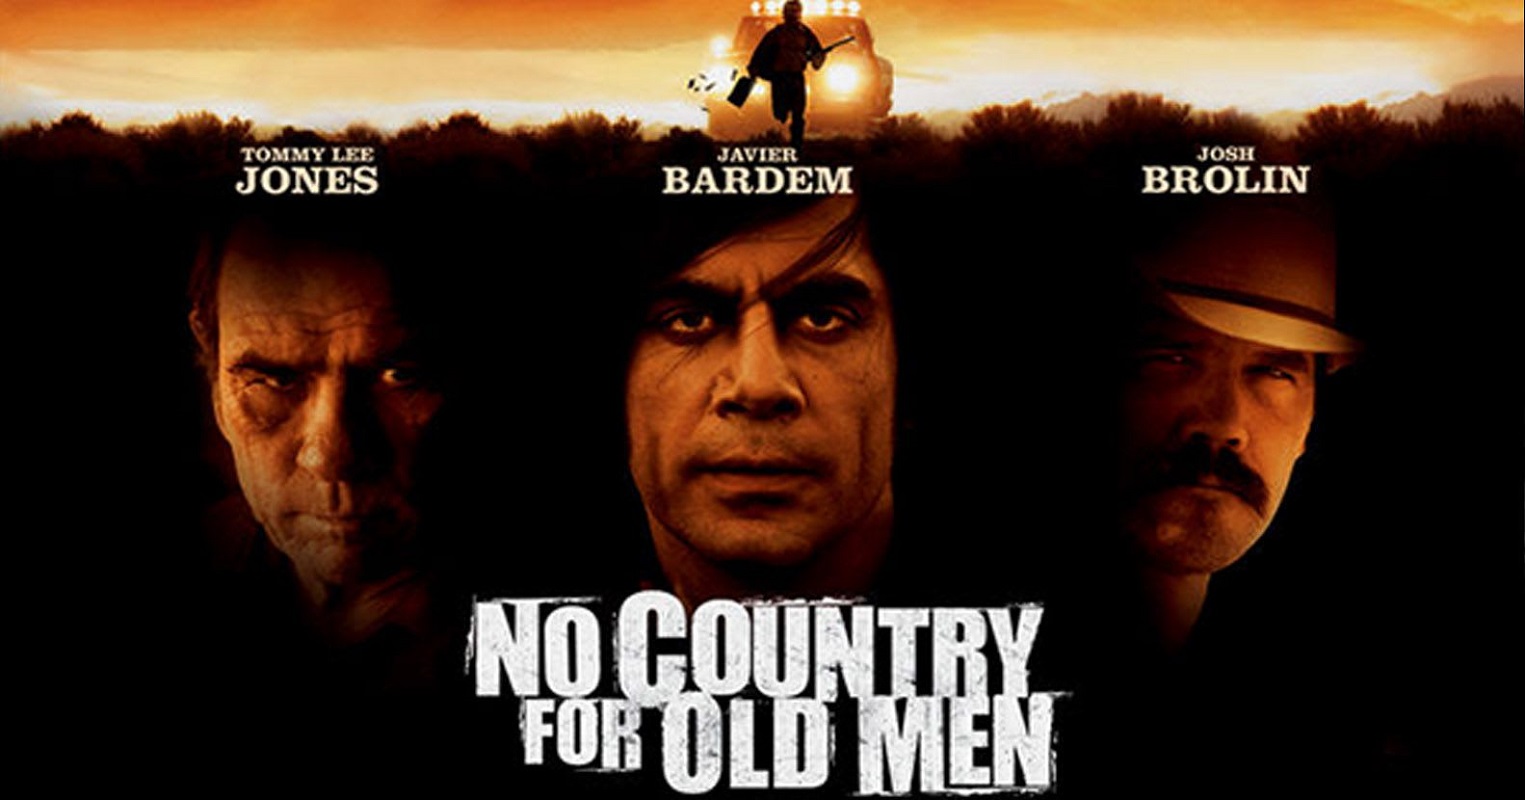 Име:  no country for old men.jpg
Разглеждания: 90
Размер:  169,6 КБ